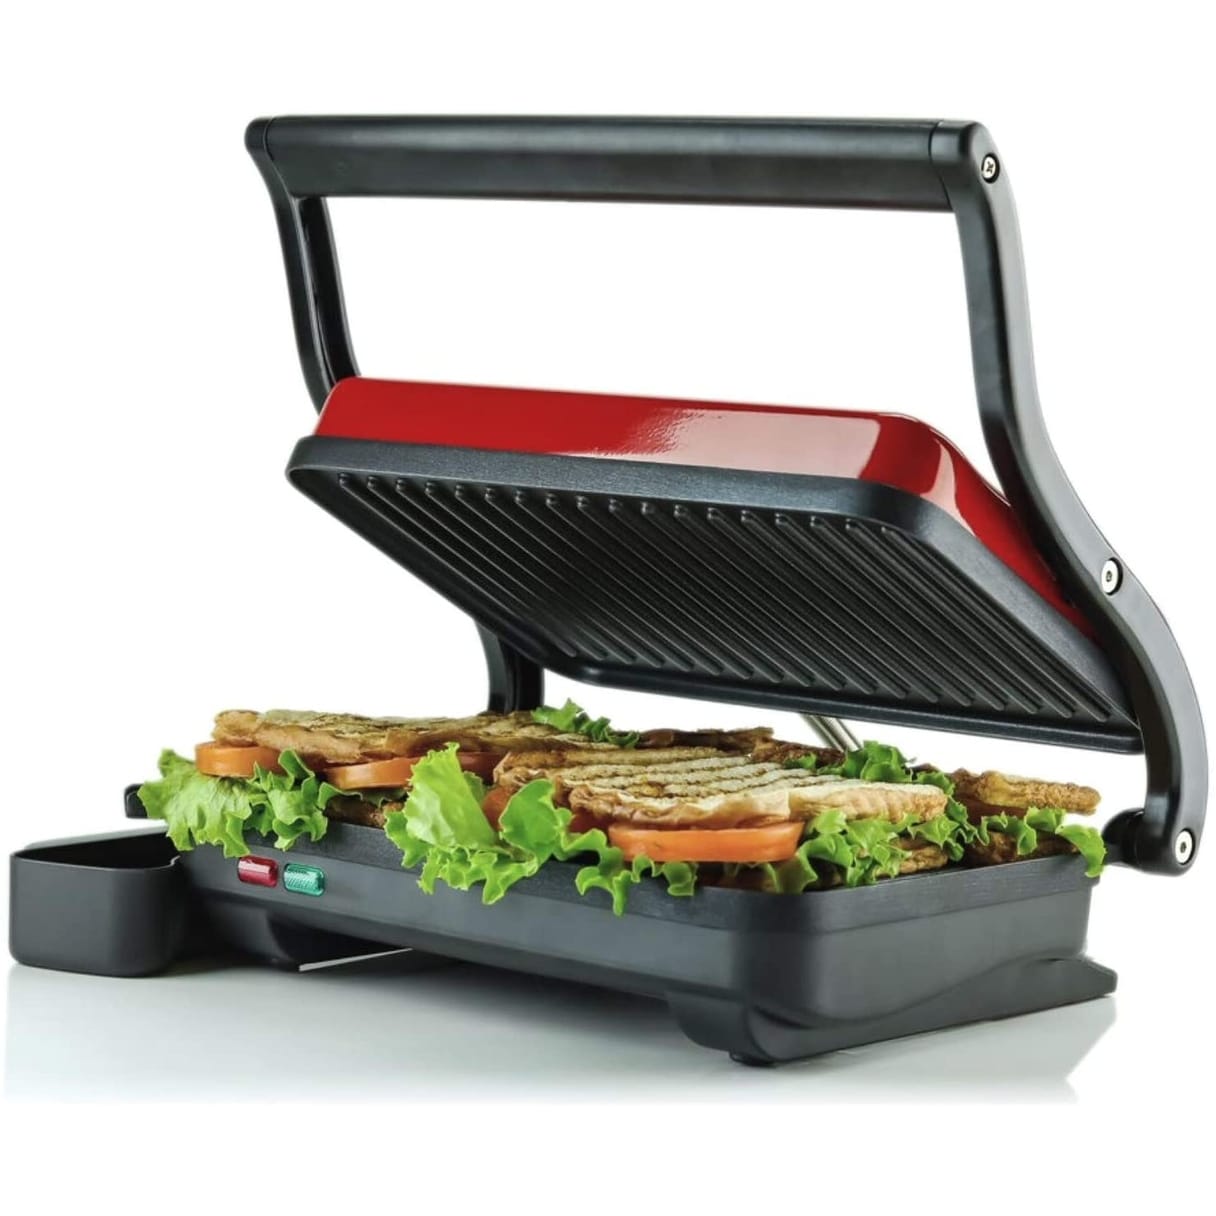 OVENTE 3 in 1 Electric Sandwich Maker, Panini Press Grill and Waffle Iron  Set with Removable Non-Stick Plates, Perfect for Cooking Grilled Cheese